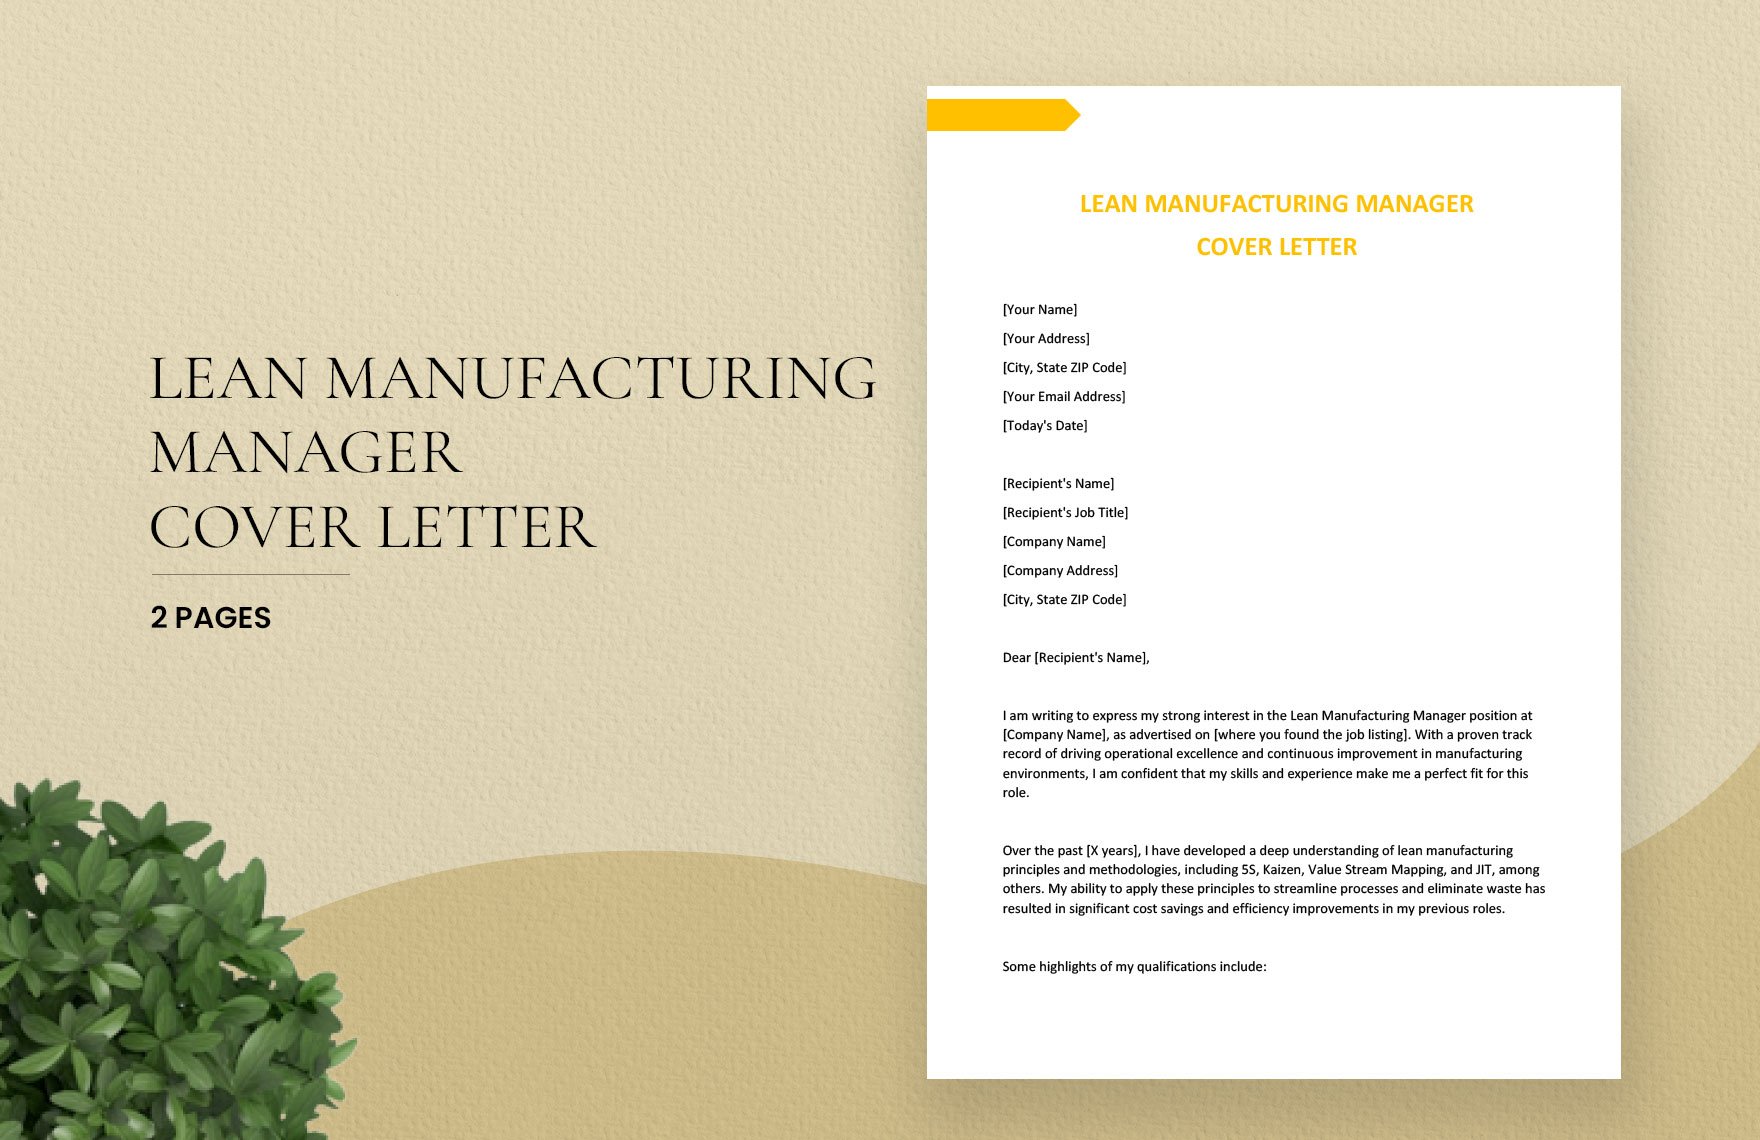 Lean Manufacturing Manager Cover Letter